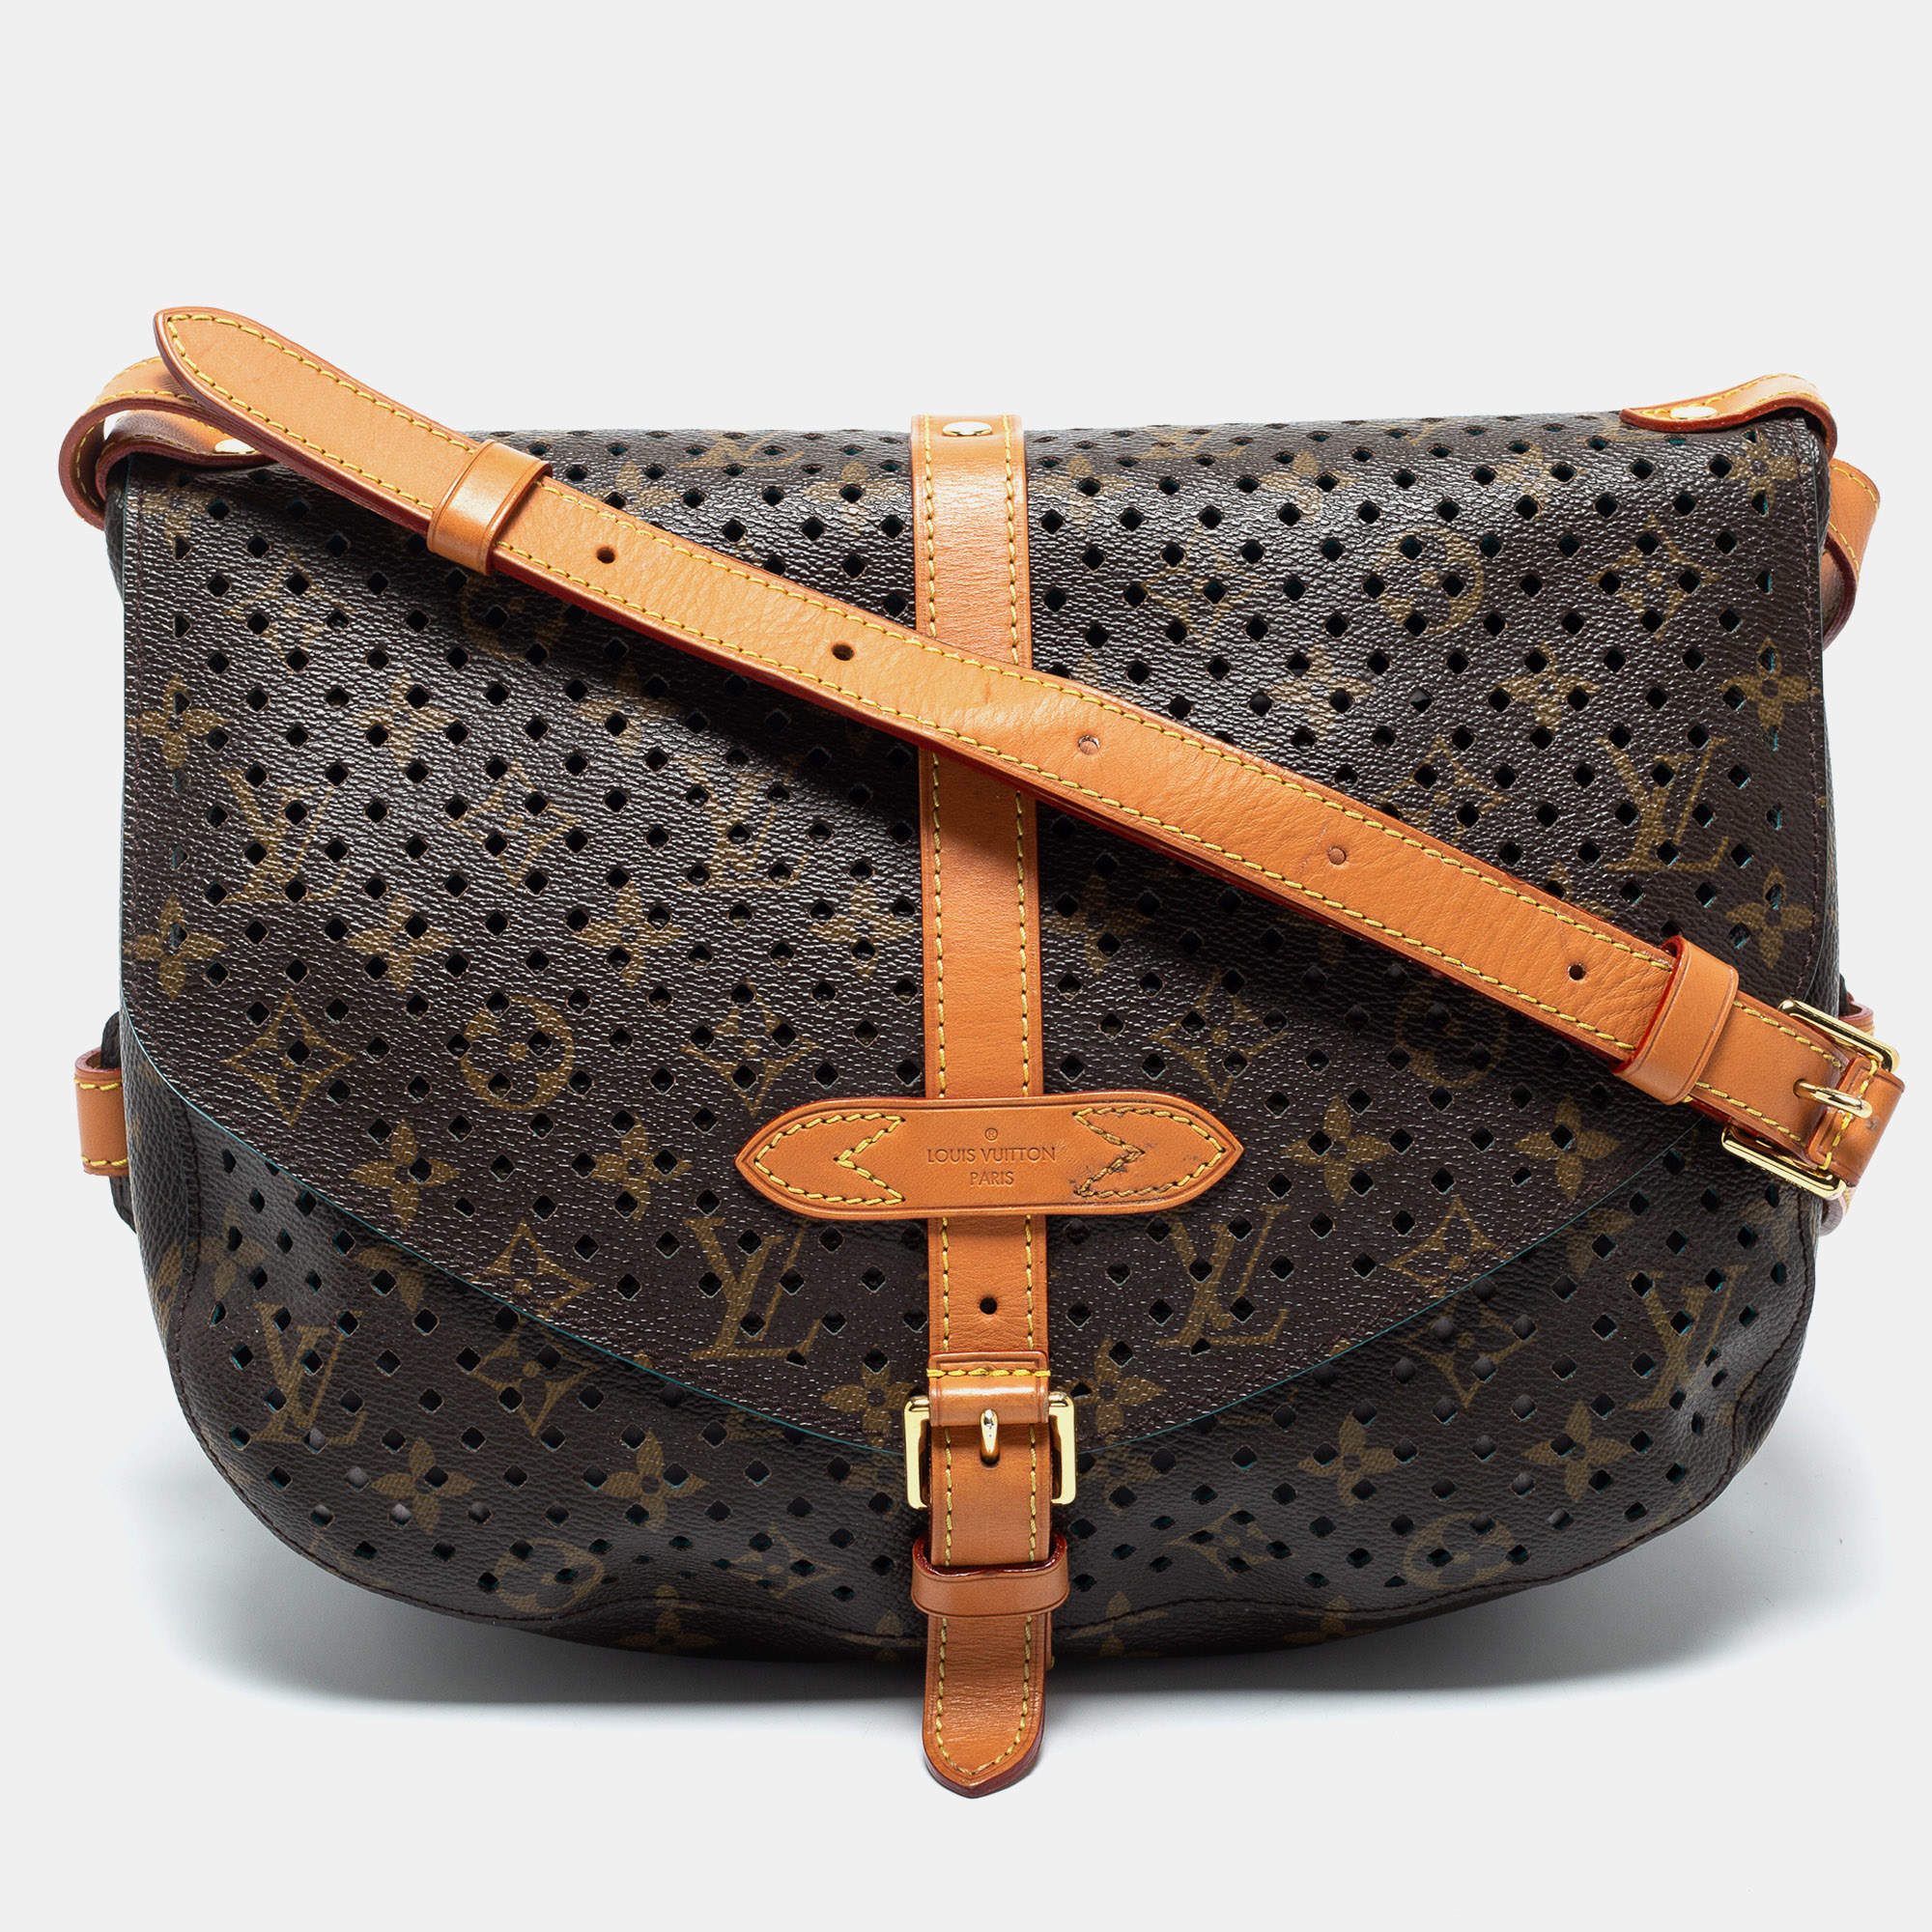 Louis Vuitton Perforated Monogram Canvas and Leather Saumur 30 Messenger Bag